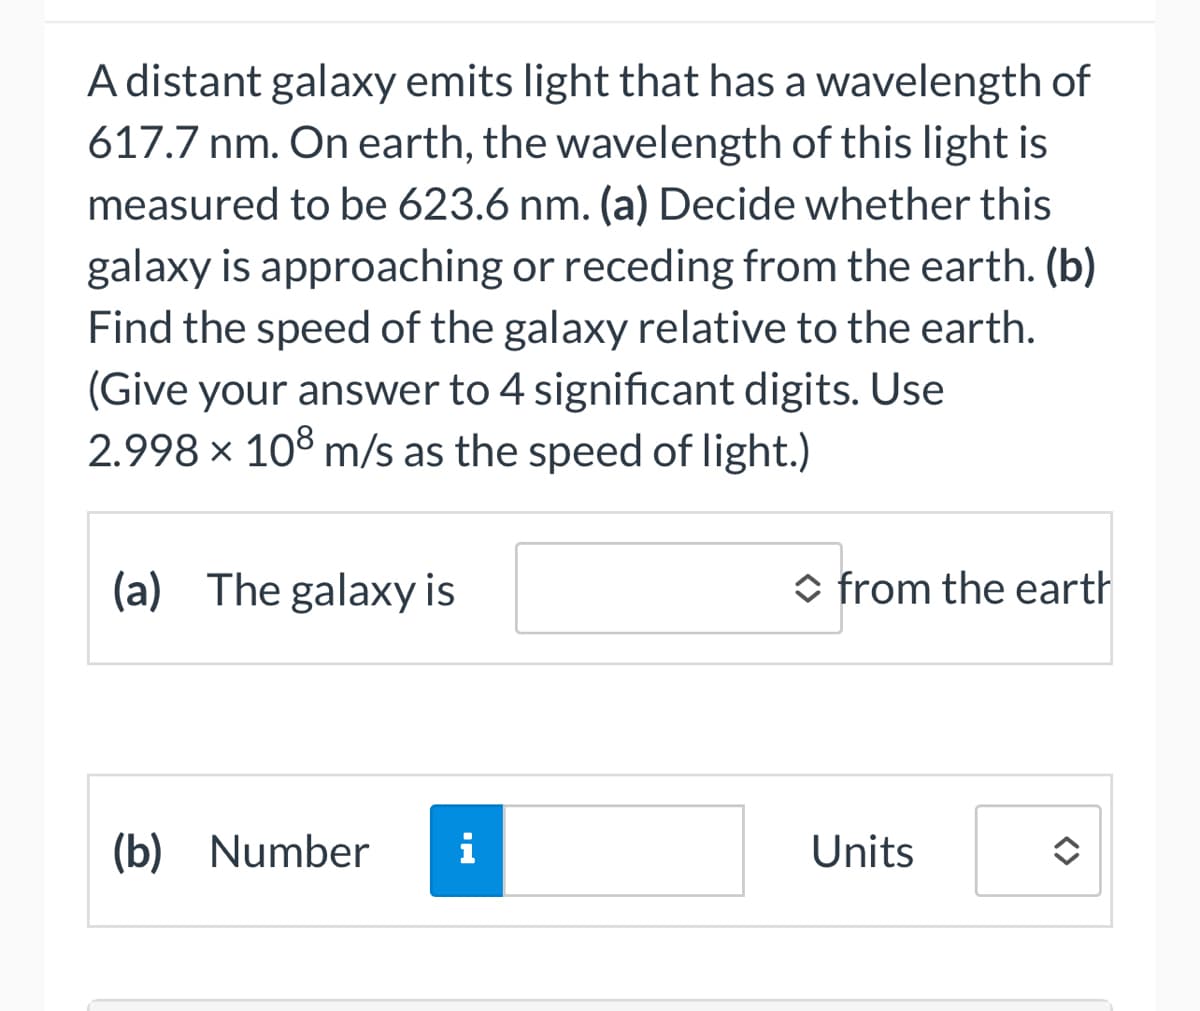 A distant galaxy emits light that has a wavelength of
617.7 nm. On earth, the wavelength of this light is
measured to be 623.6 nm. (a) Decide whether this
galaxy is approaching or receding from the earth. (b)
Find the speed of the galaxy relative to the earth.
(Give your answer to 4 significant digits. Use
2.998 × 108 m/s as the speed of light.)
(a) The galaxy is
(b) Number
◆ from the earth
Units
✪